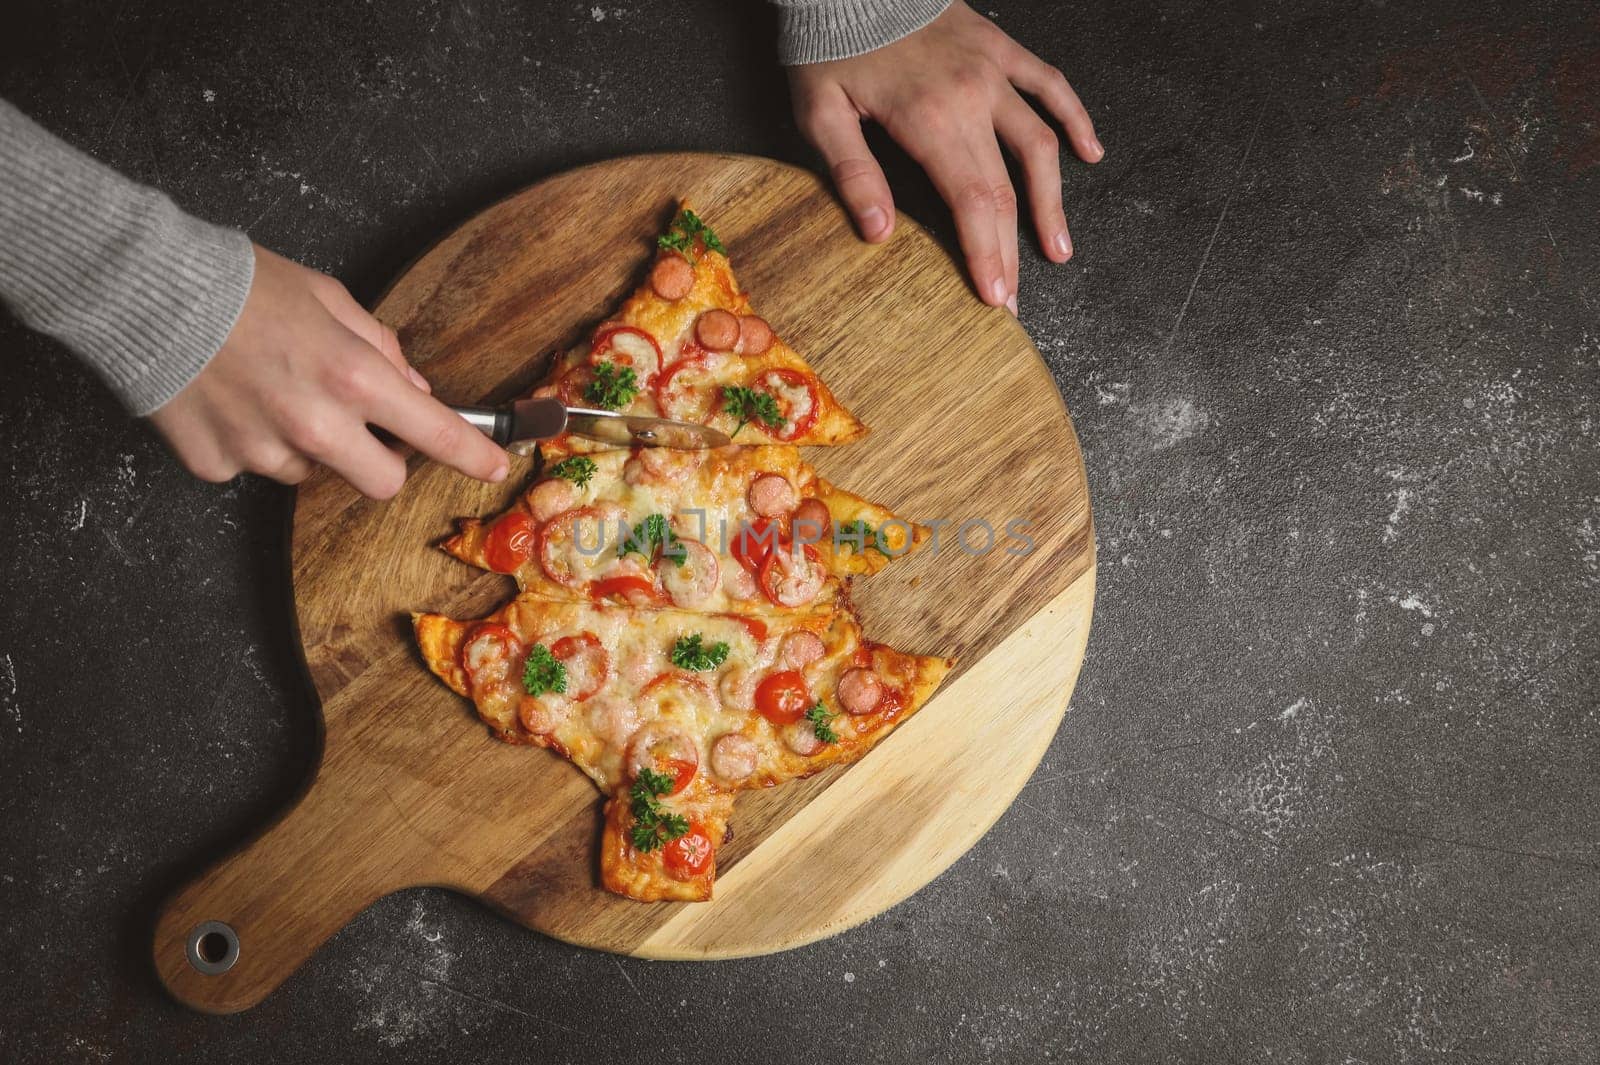 Hands of a Caucasian teenage girl cuts a moonknife pizza in the shape of a Christmas tree on a cutting board on a dark background, close-up top view.